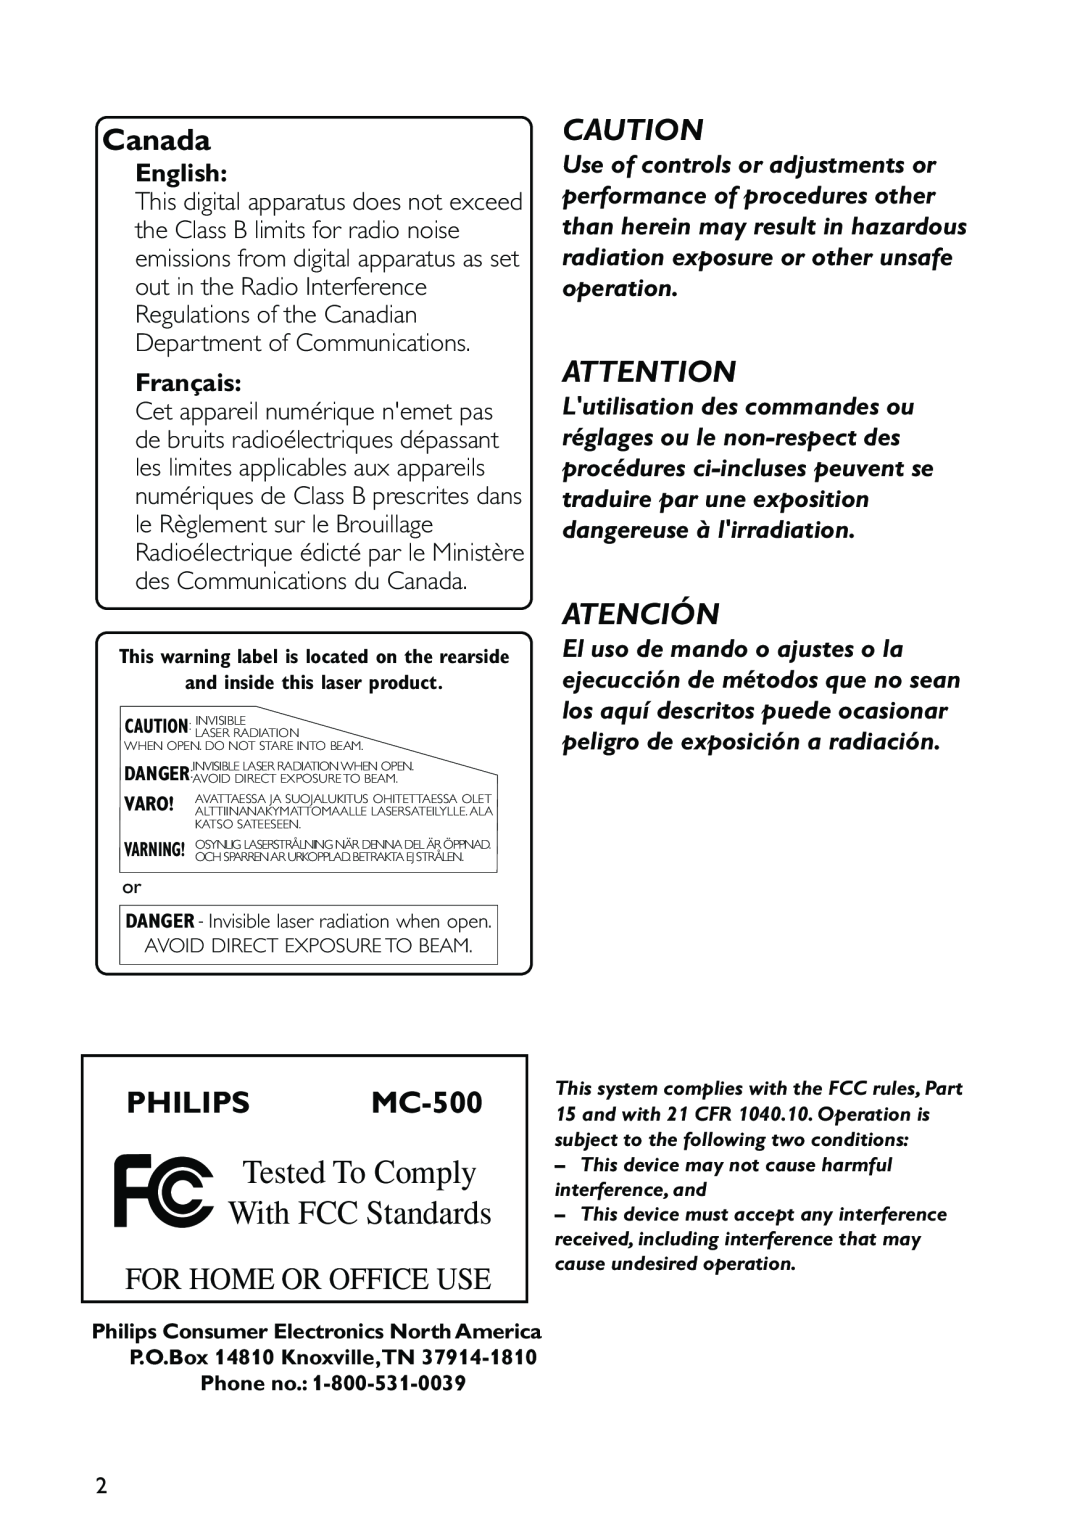 Philips warranty Canada, PHILIPS MC-500, Atención, English, Français, Tested To Comply With FCC Standards 